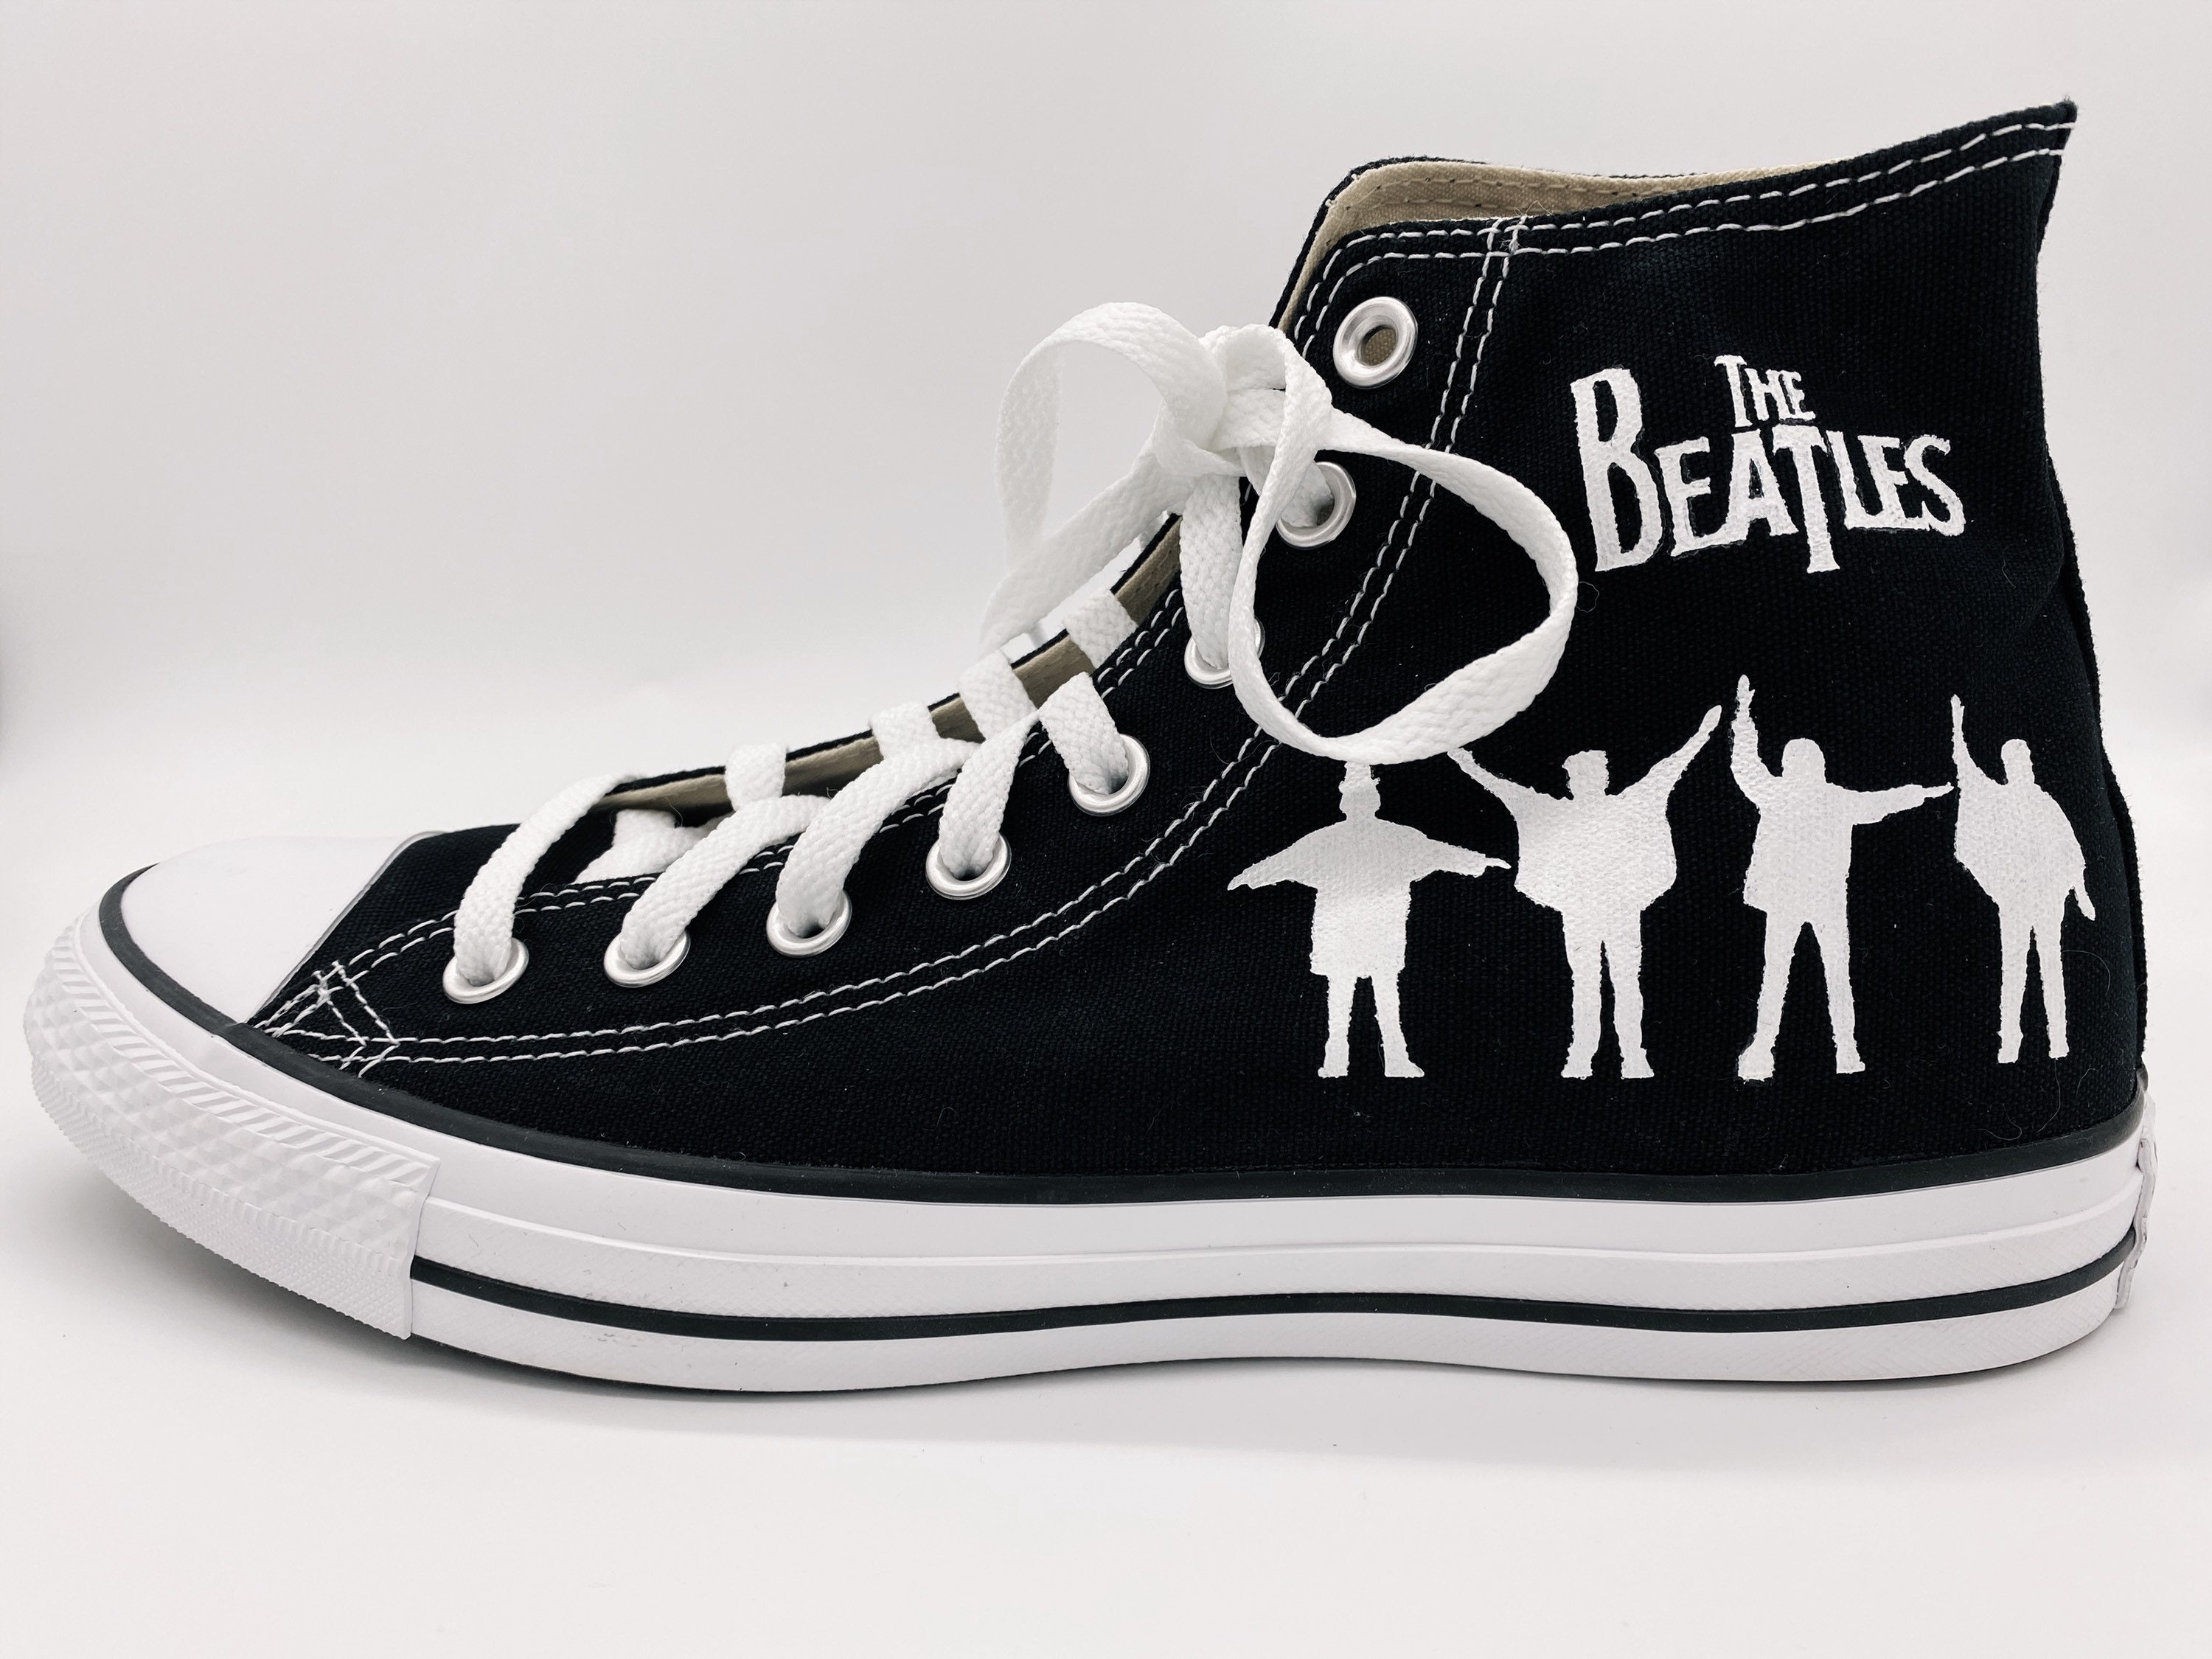 Hand Painted the Beatles Converse - Etsy